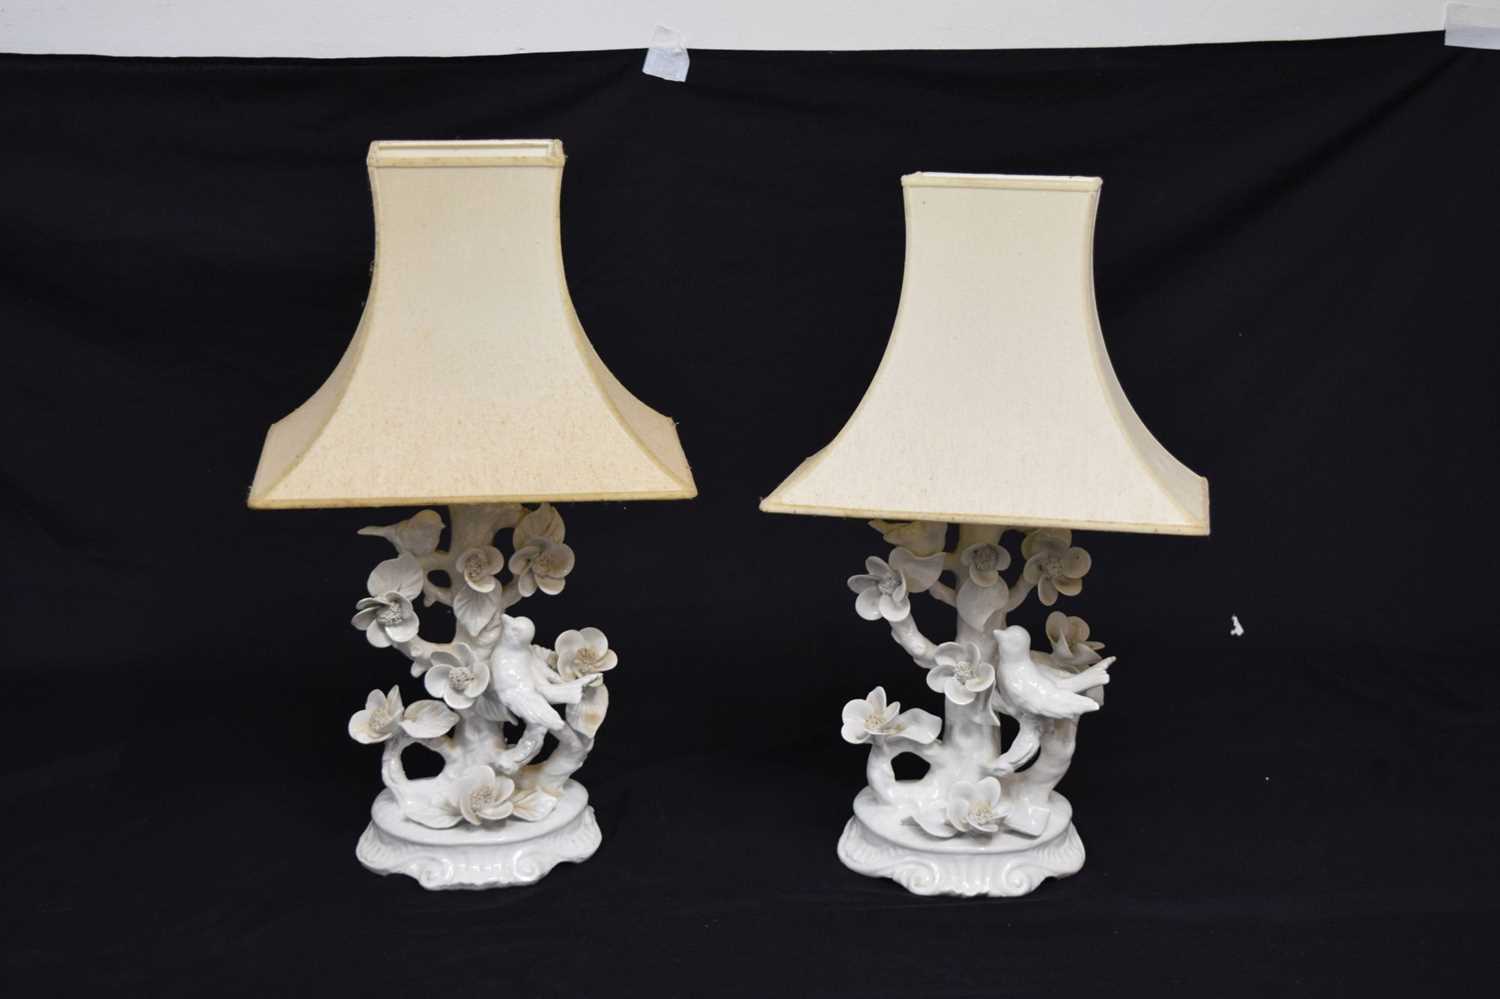 Pair of Italian porcelain bird table lamps - Image 2 of 10